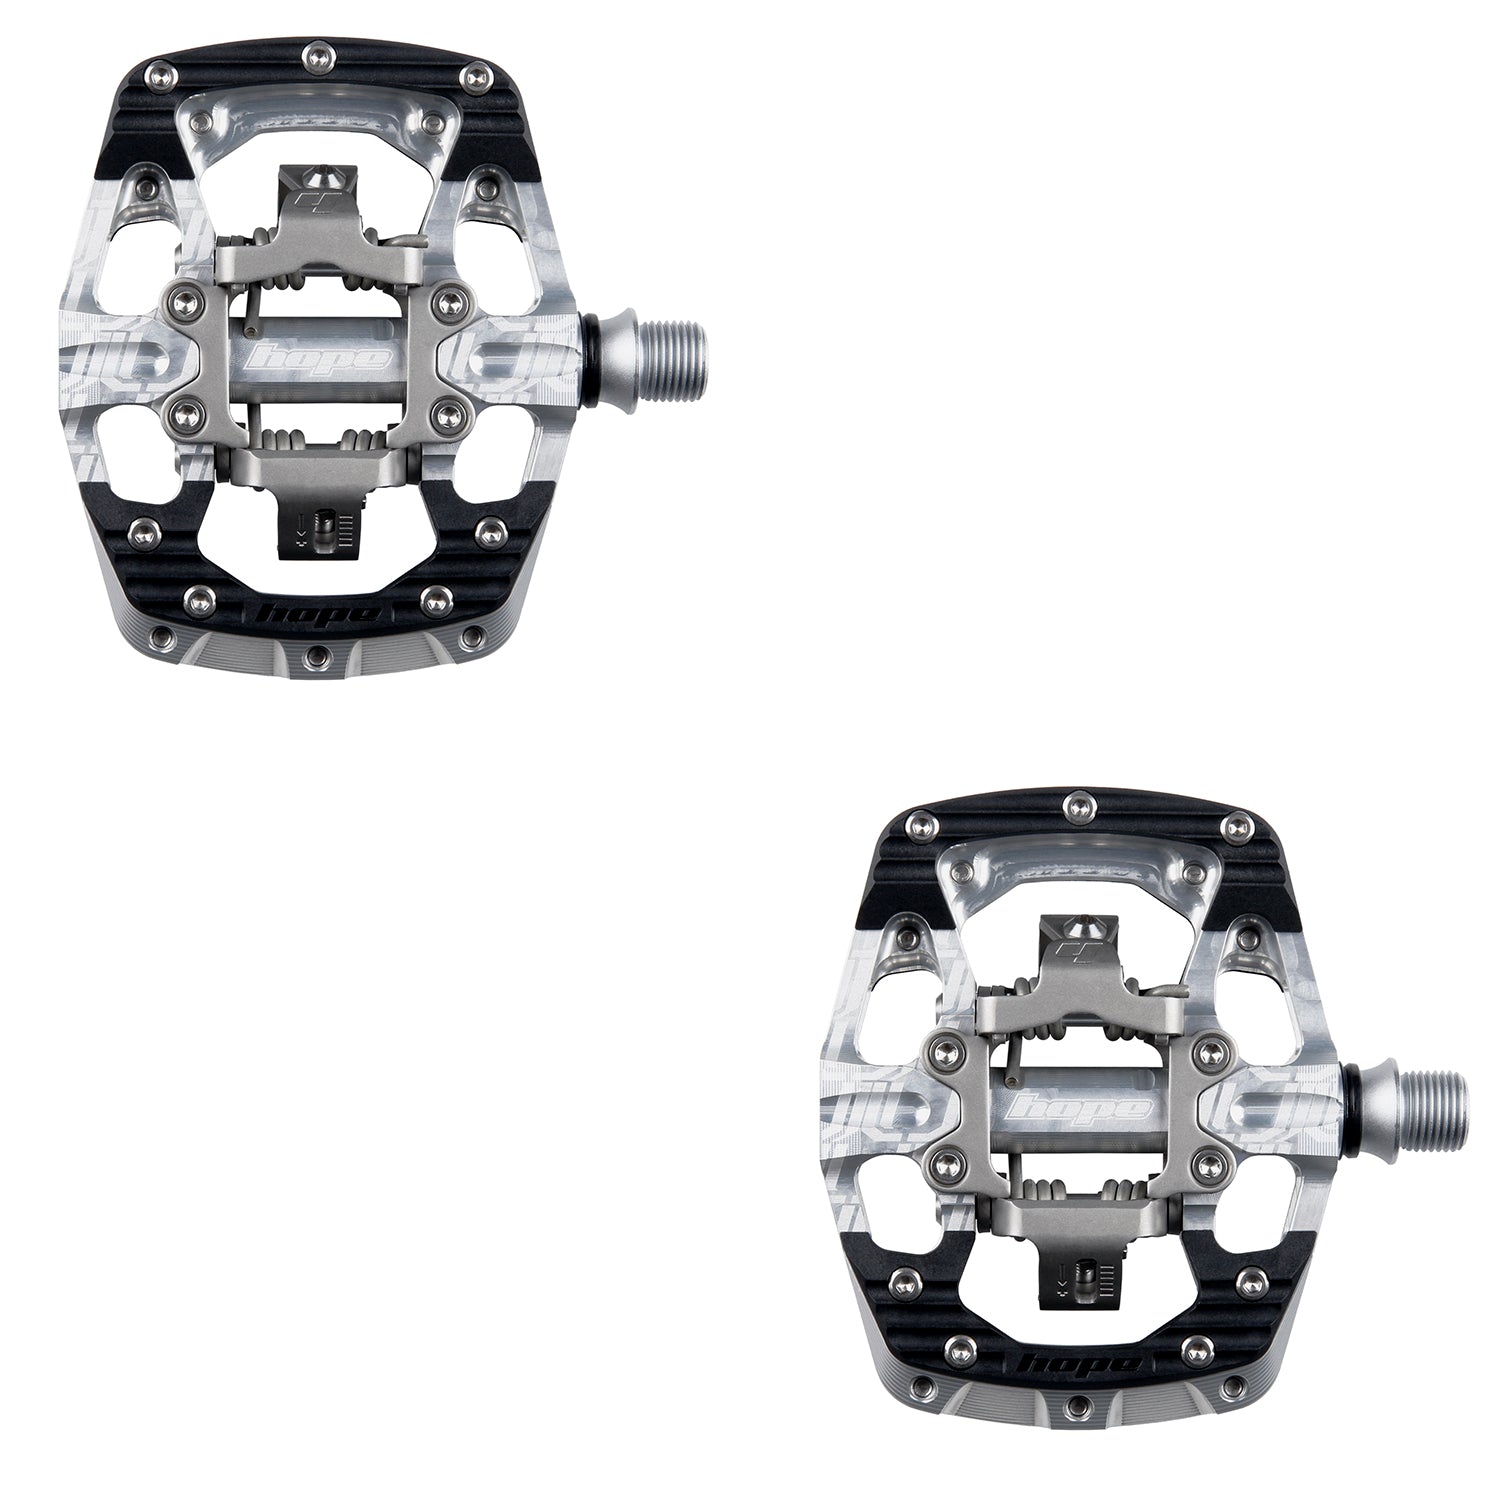 Hope union gravity clipless pedals silver